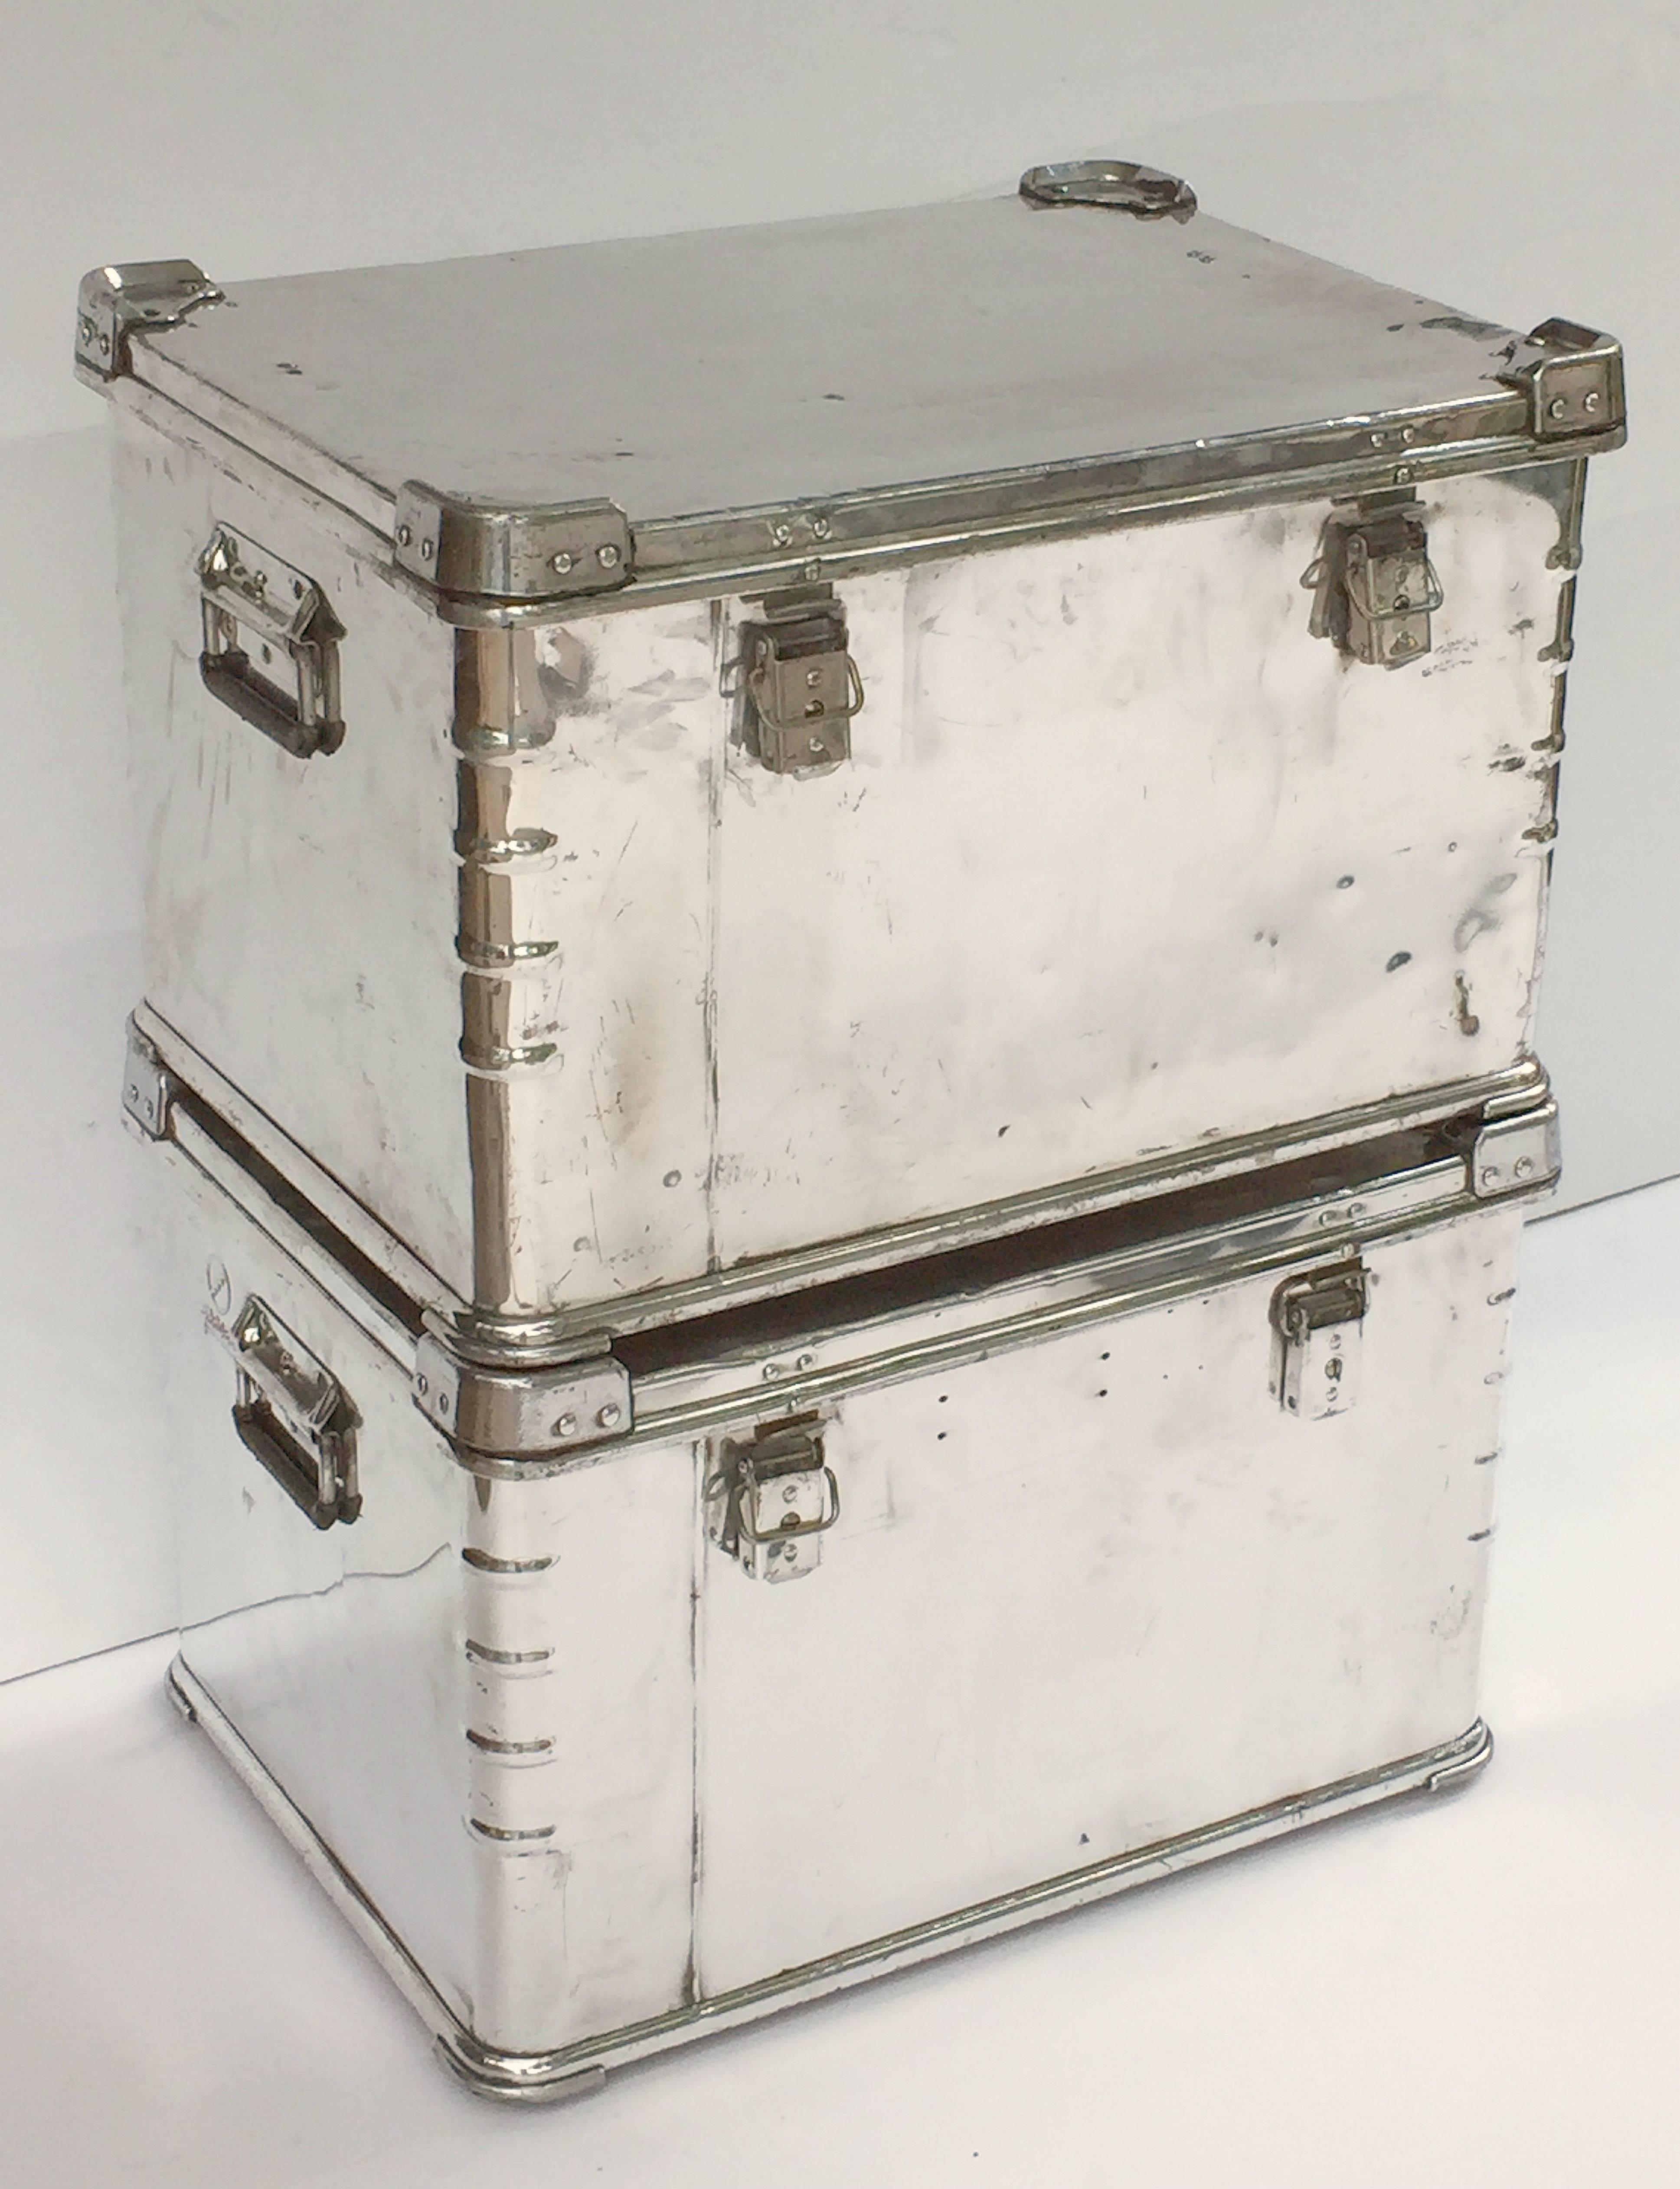 A fine pair of German luggage or storage trunks of polished aluminum each rectangular trunk featuring a fitted, hinged top with reinforced corners. Each trunk with plastic shielded handles.

Individually priced - $3495 each trunk.